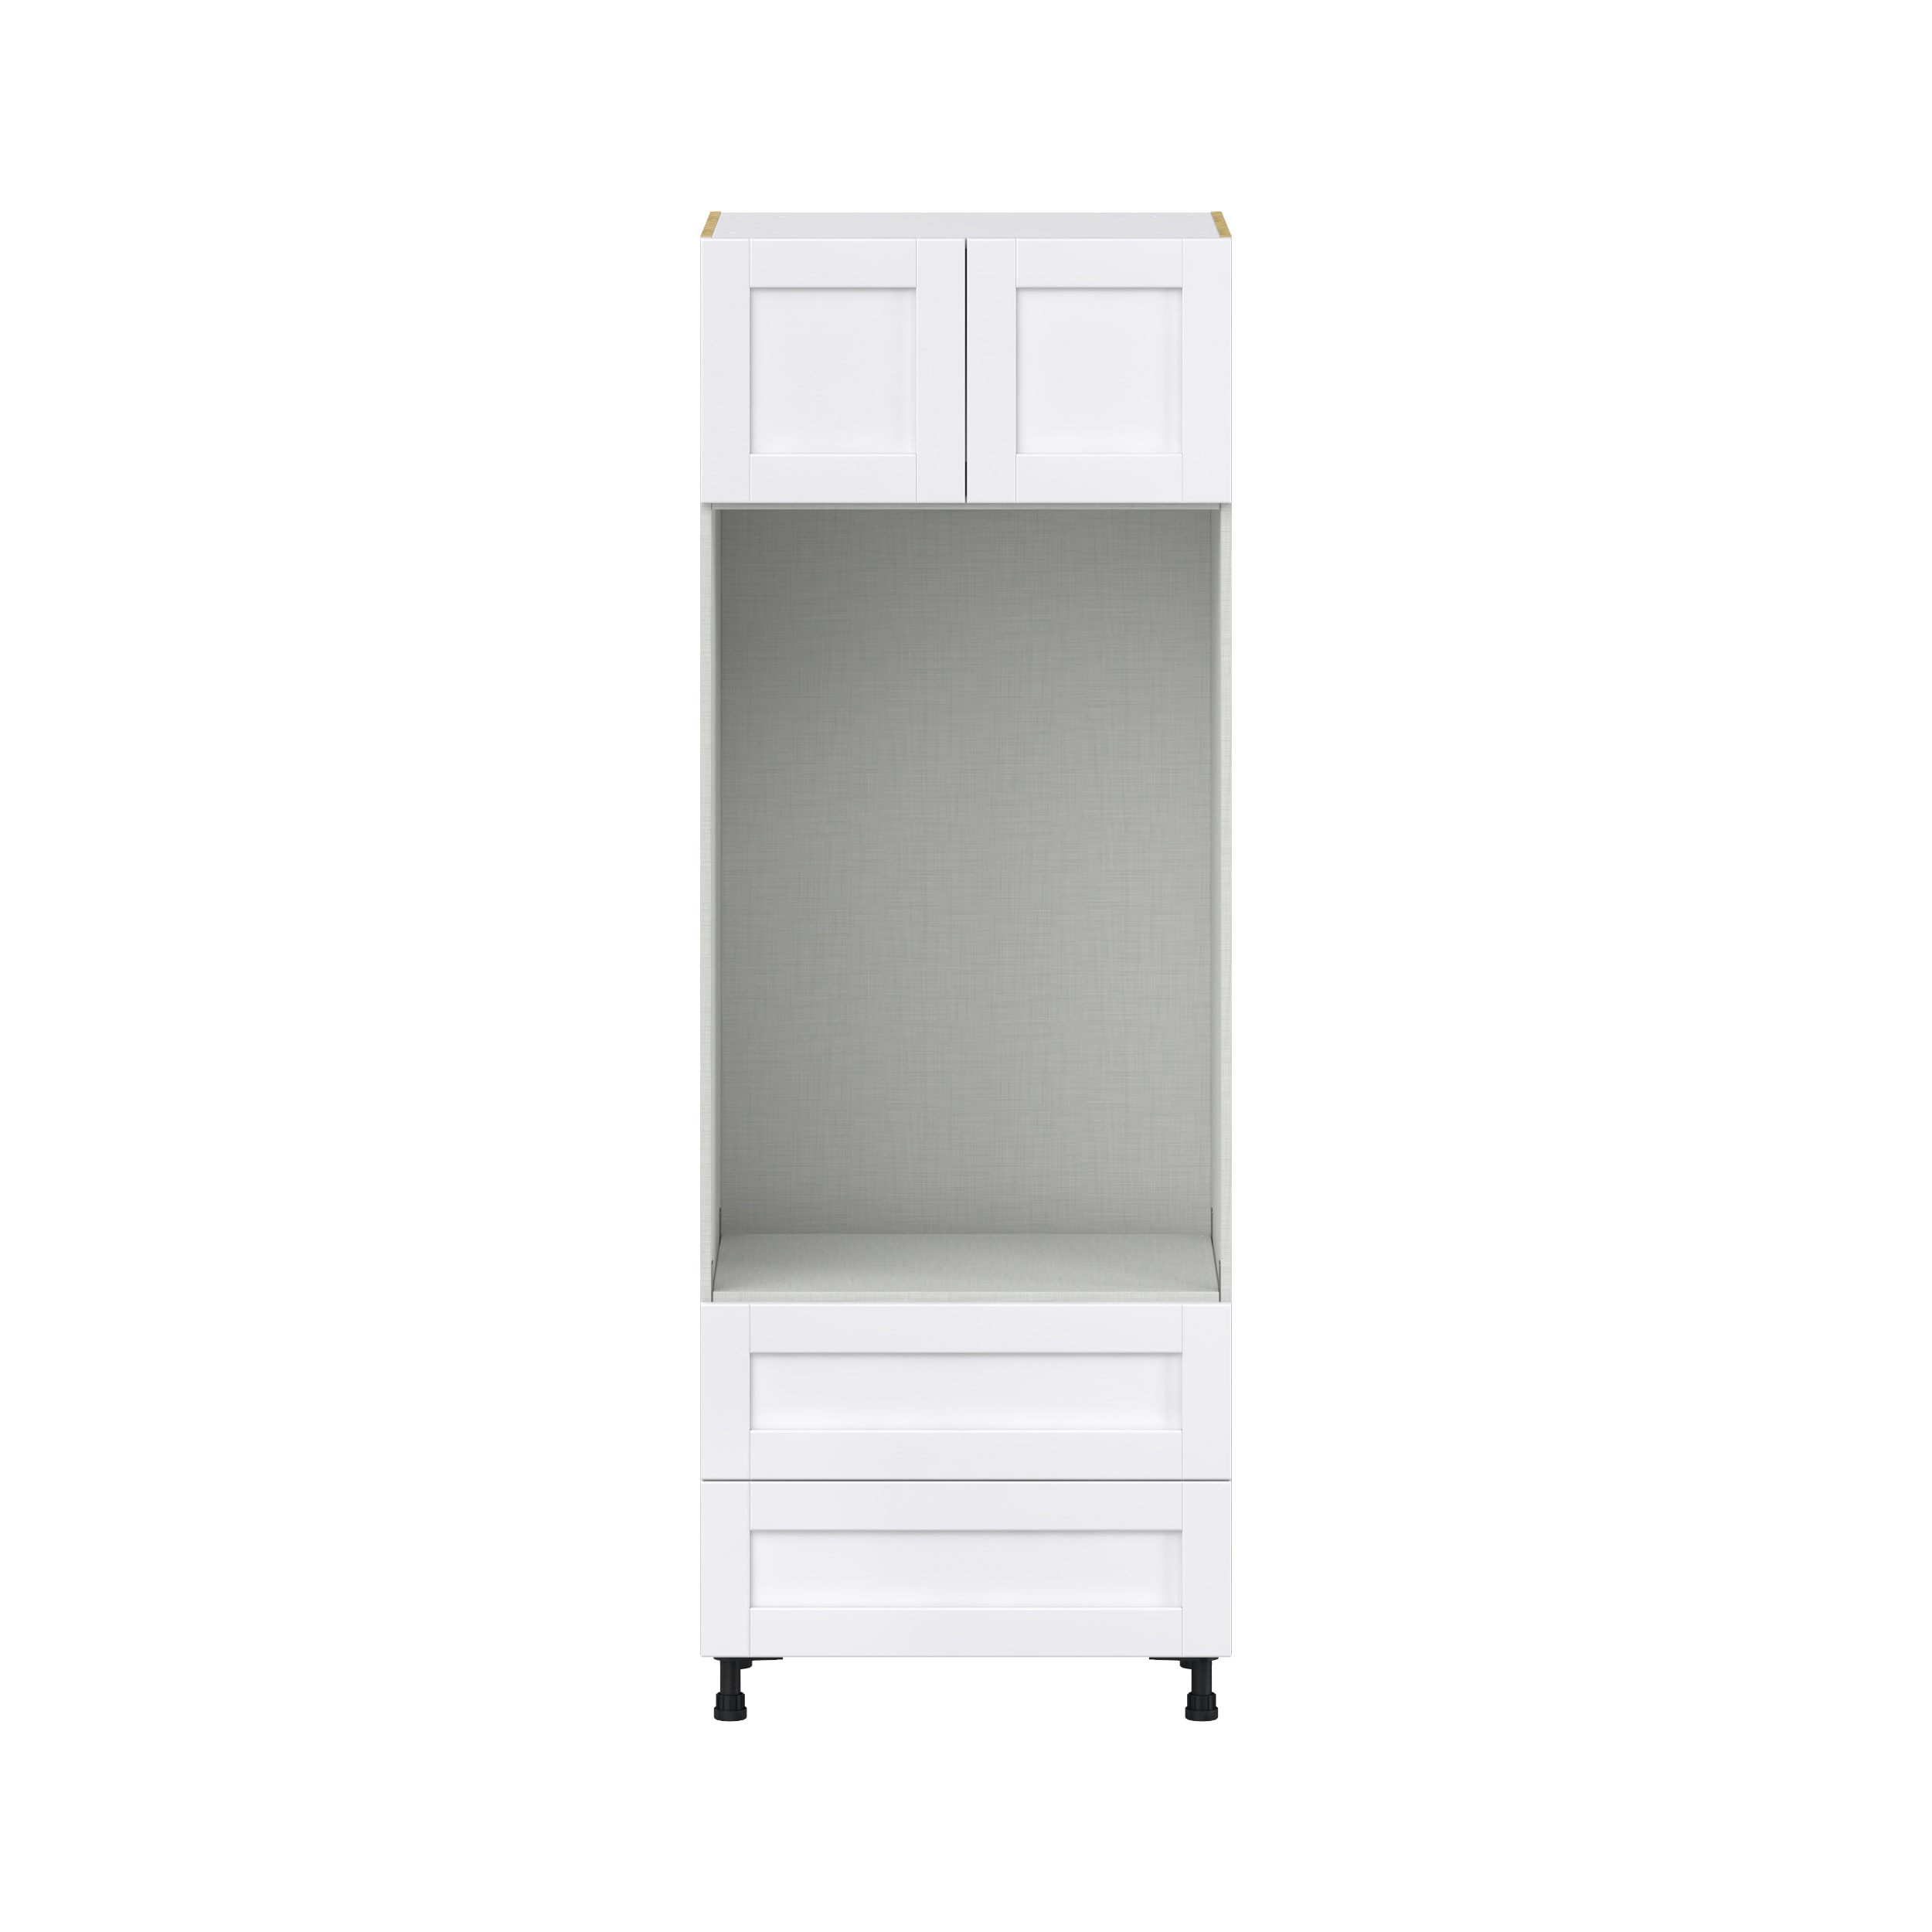 Knape and Vogt 24 in. H x 3 in. W x 13 in. D Steel Appliance Lift Cabinet